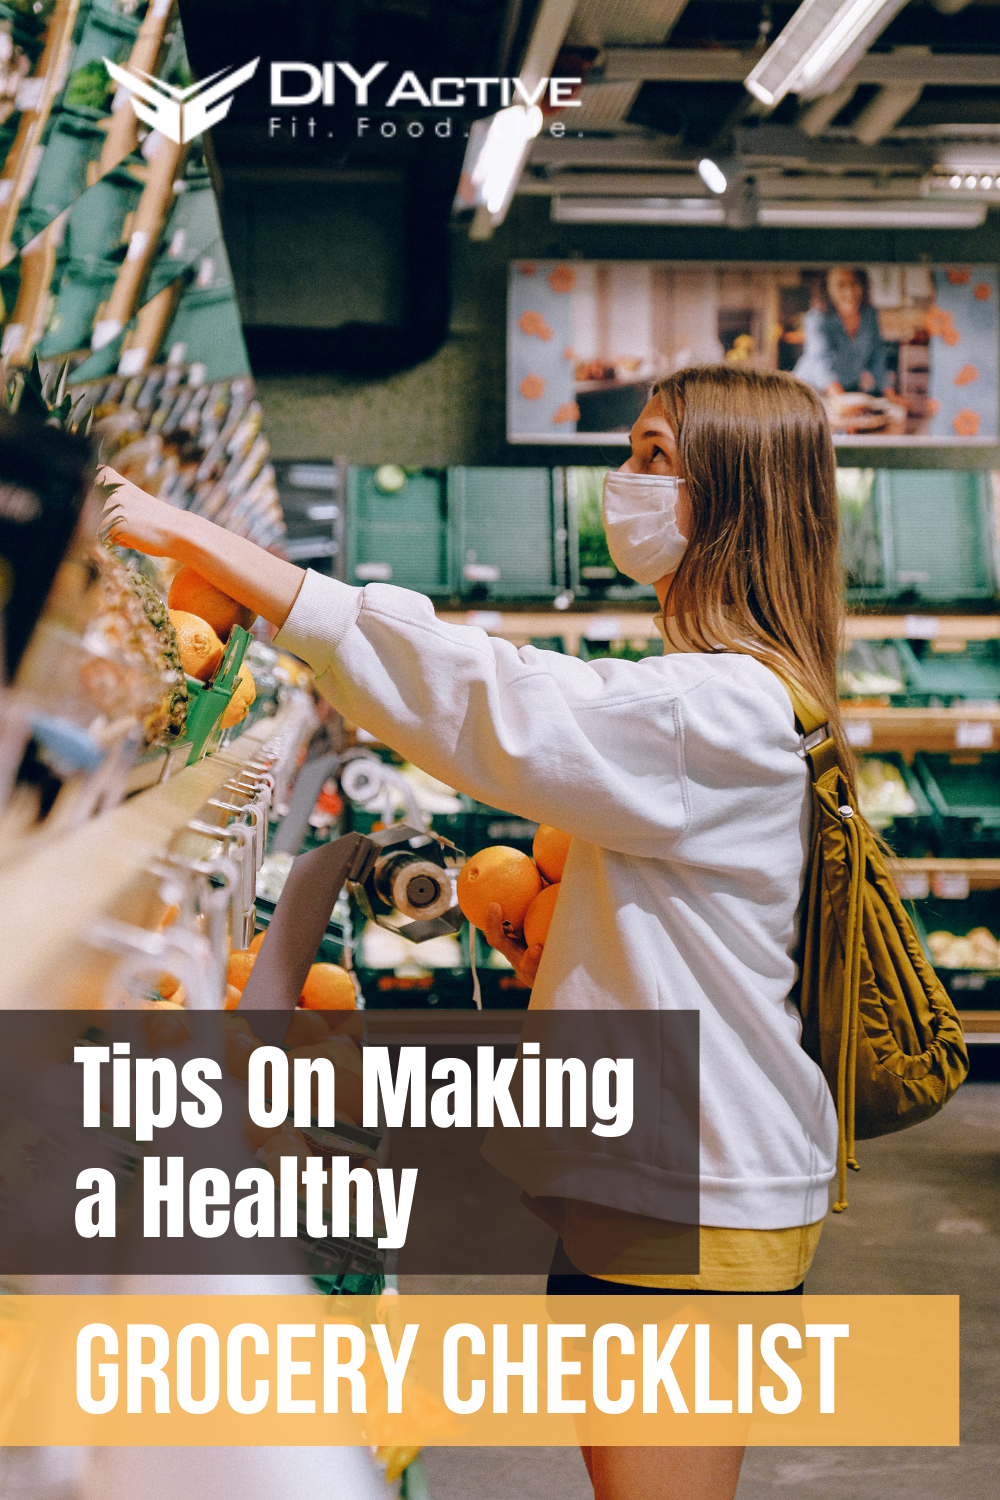 Tips for Making a Healthy Grocery Checklist